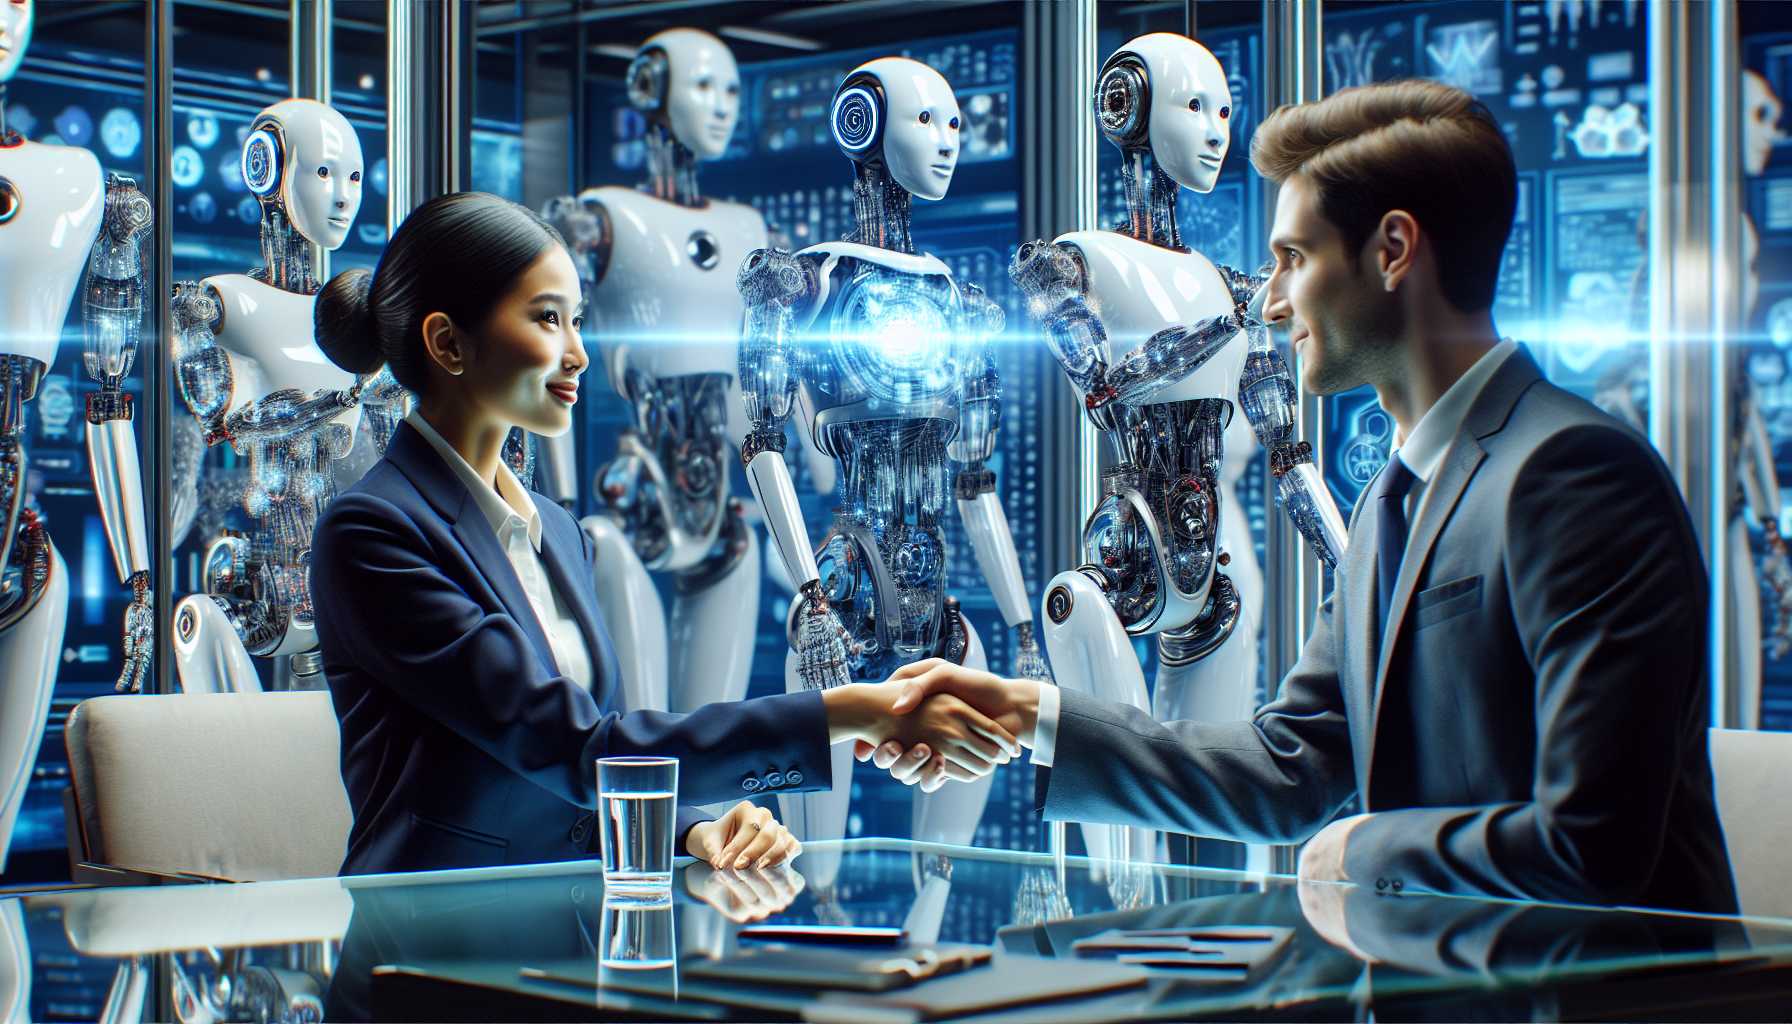 Two businesspeople shaking hands on a bet with AI robots in the background